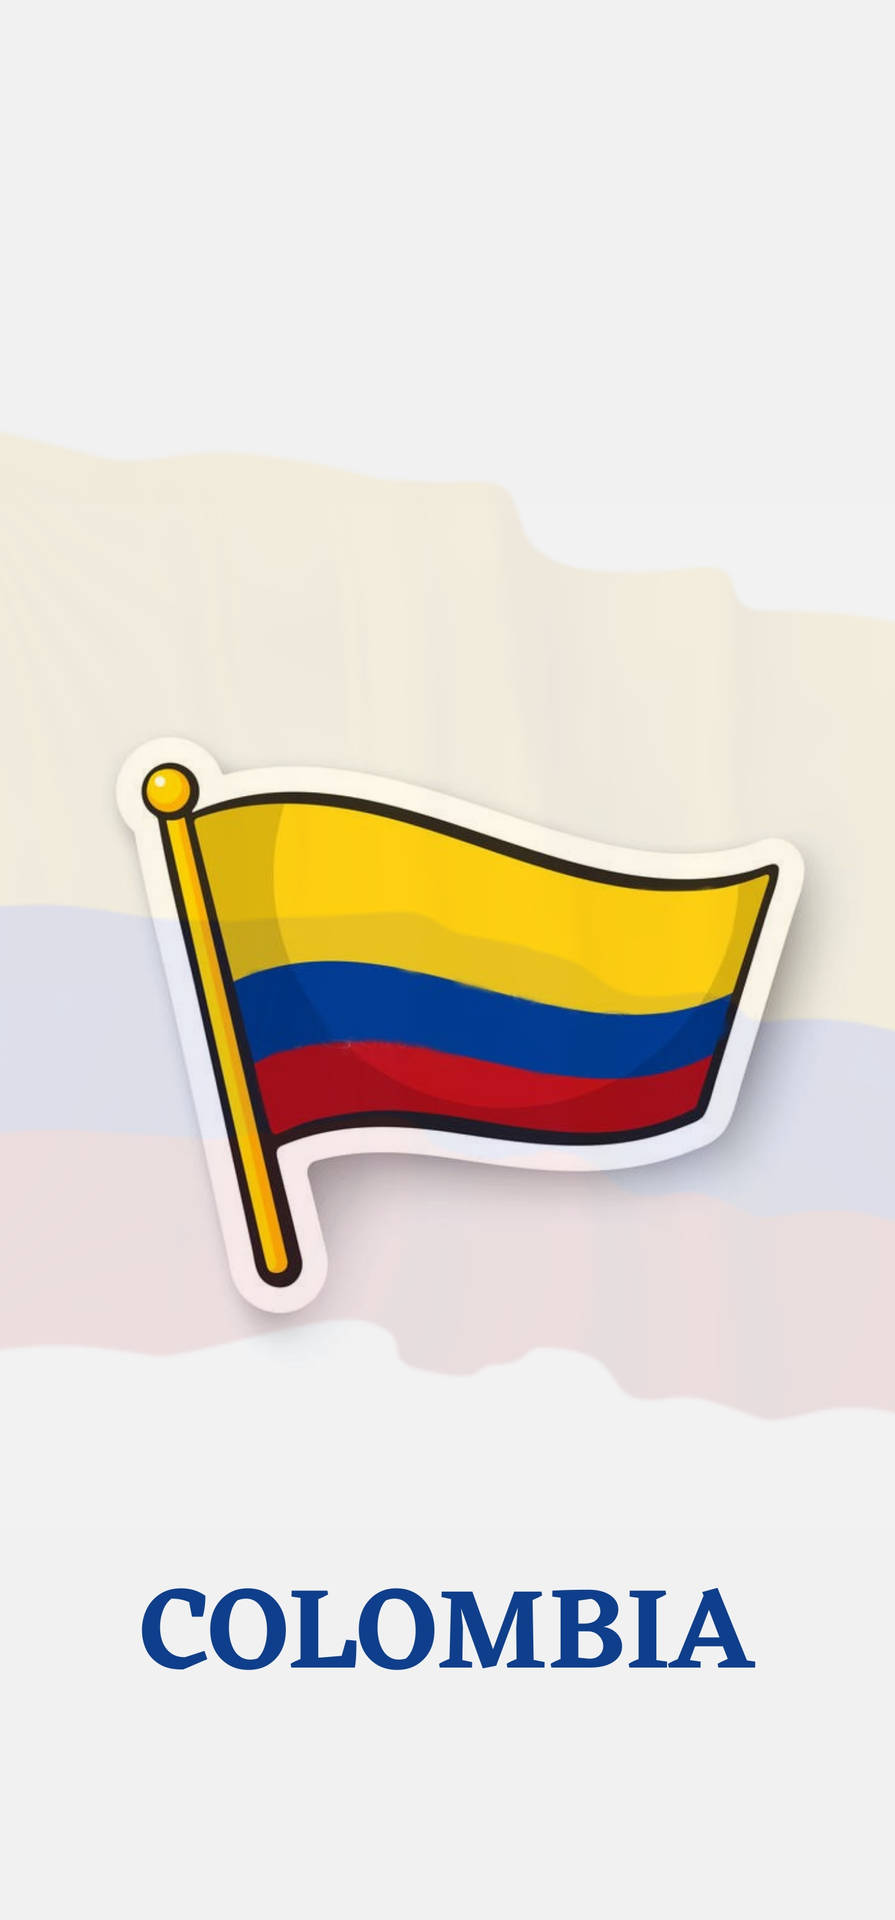 Colombia Flag Vector Background